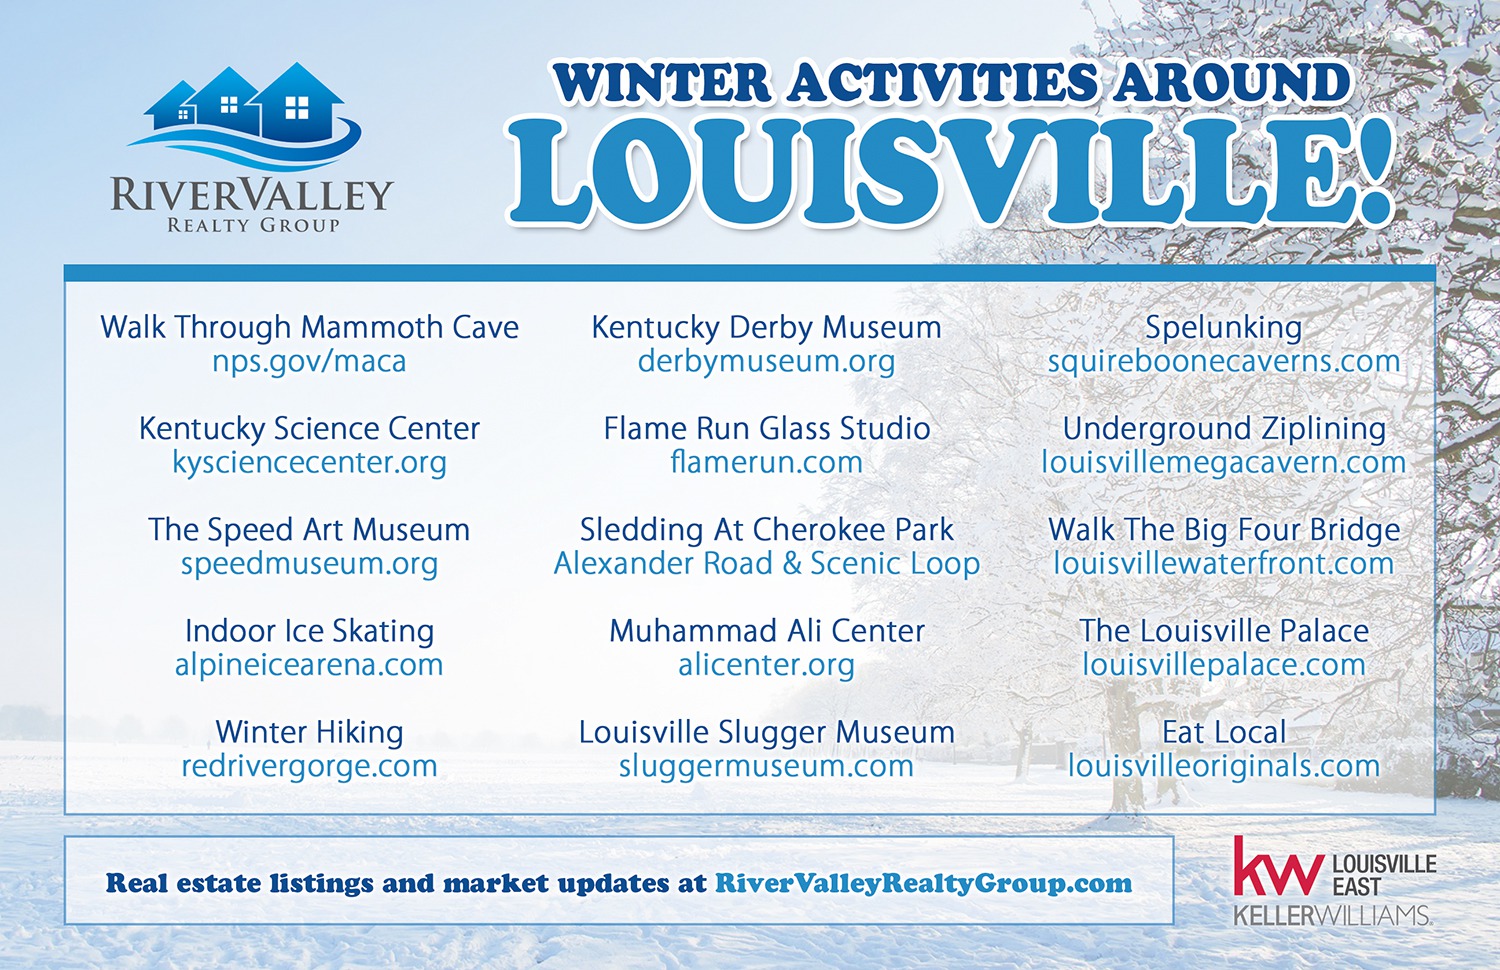 Things to do this winter around Louisville!